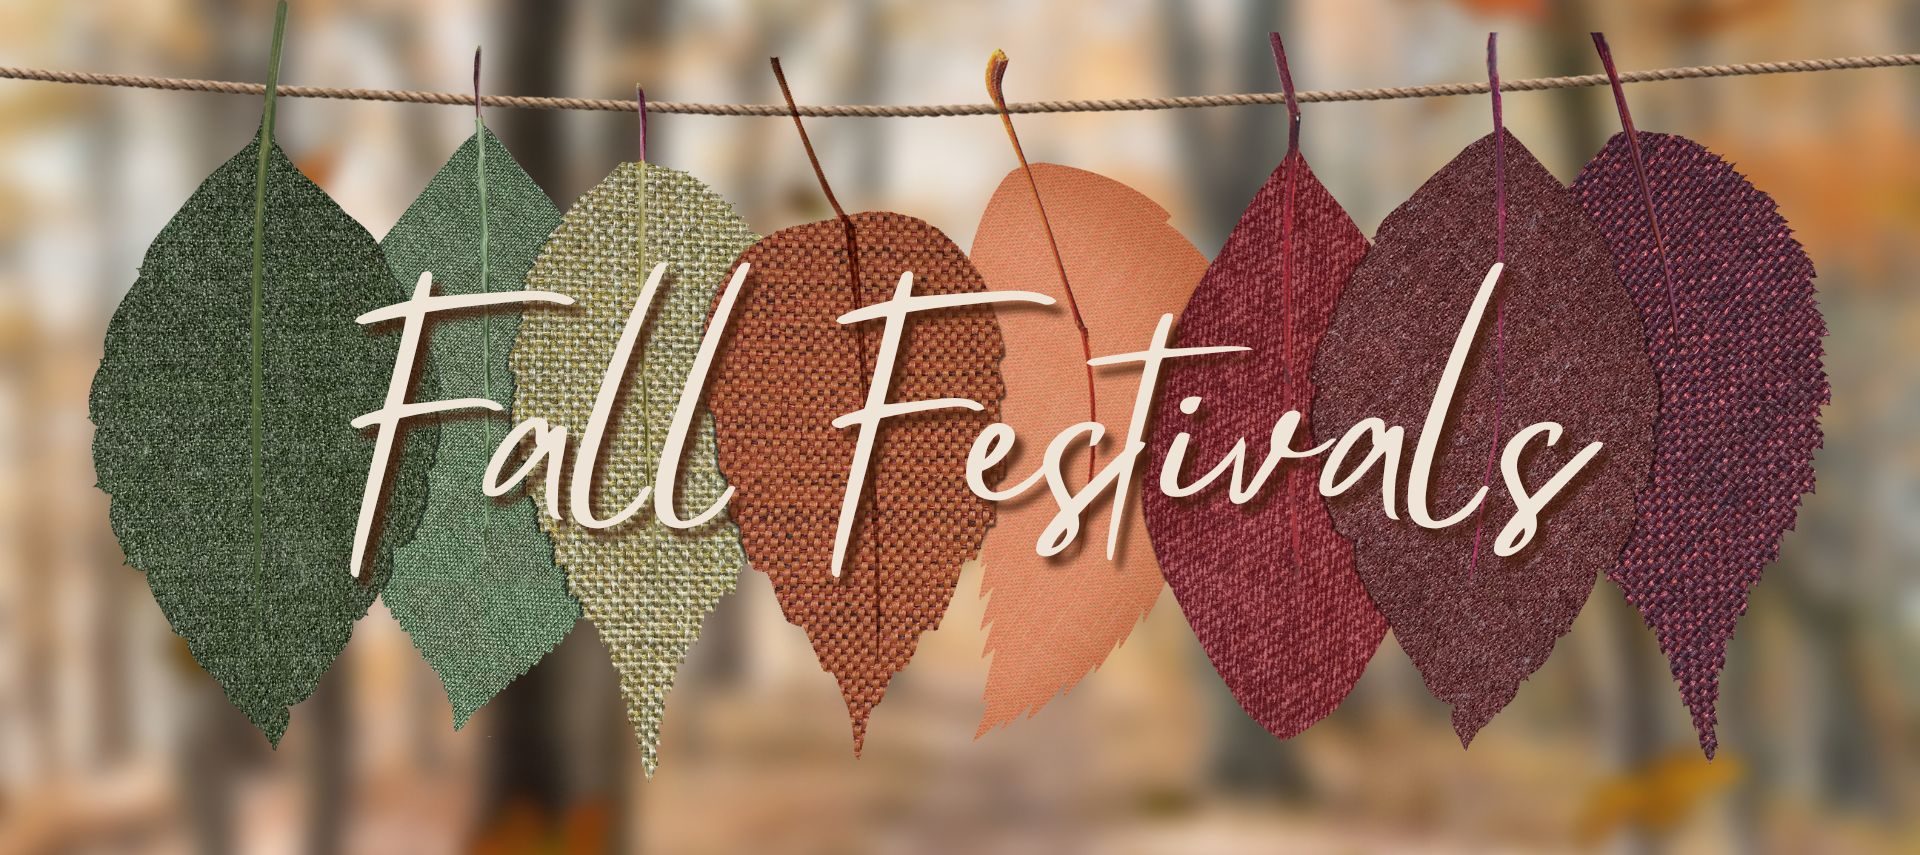 Fall colored fabric leaves handing from a string with text “Fall Festivals”